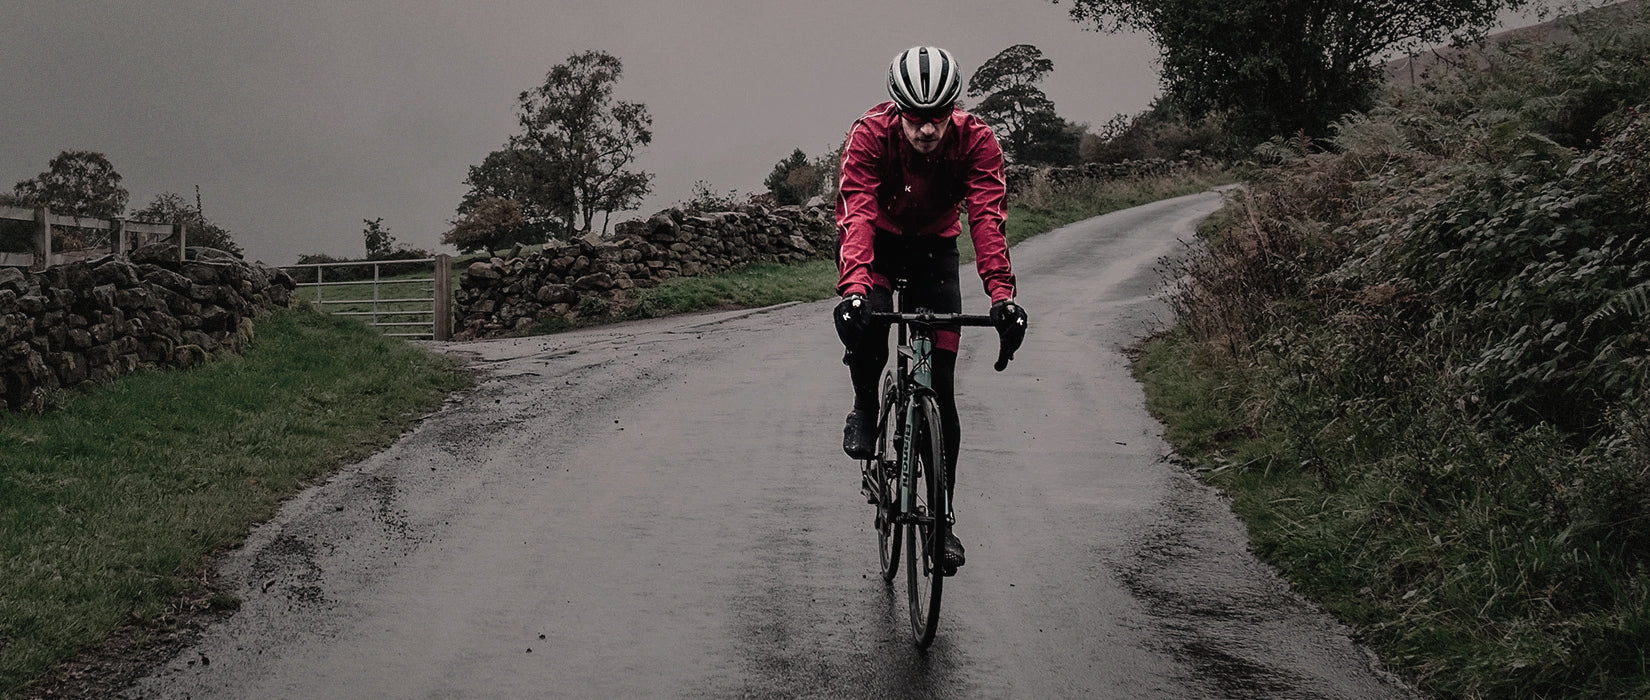 wet weather cycling pants